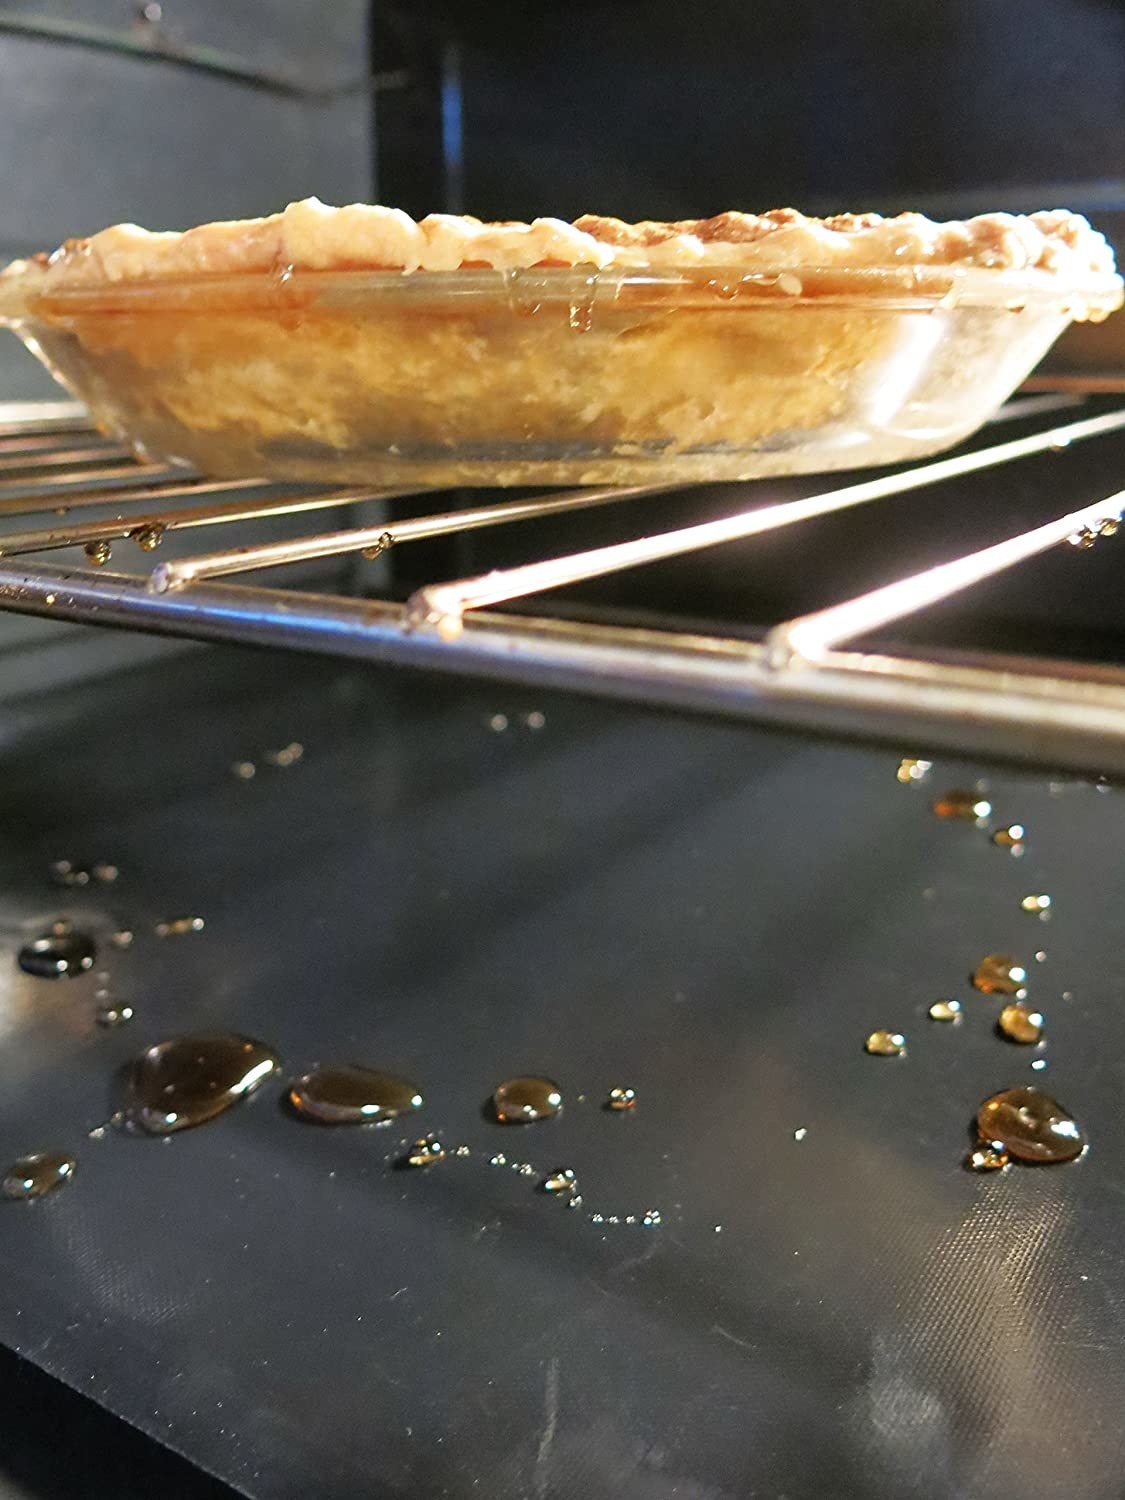 pie in oven; beneath, the mat on a rack, catching the sugary drips from the edges of the pie